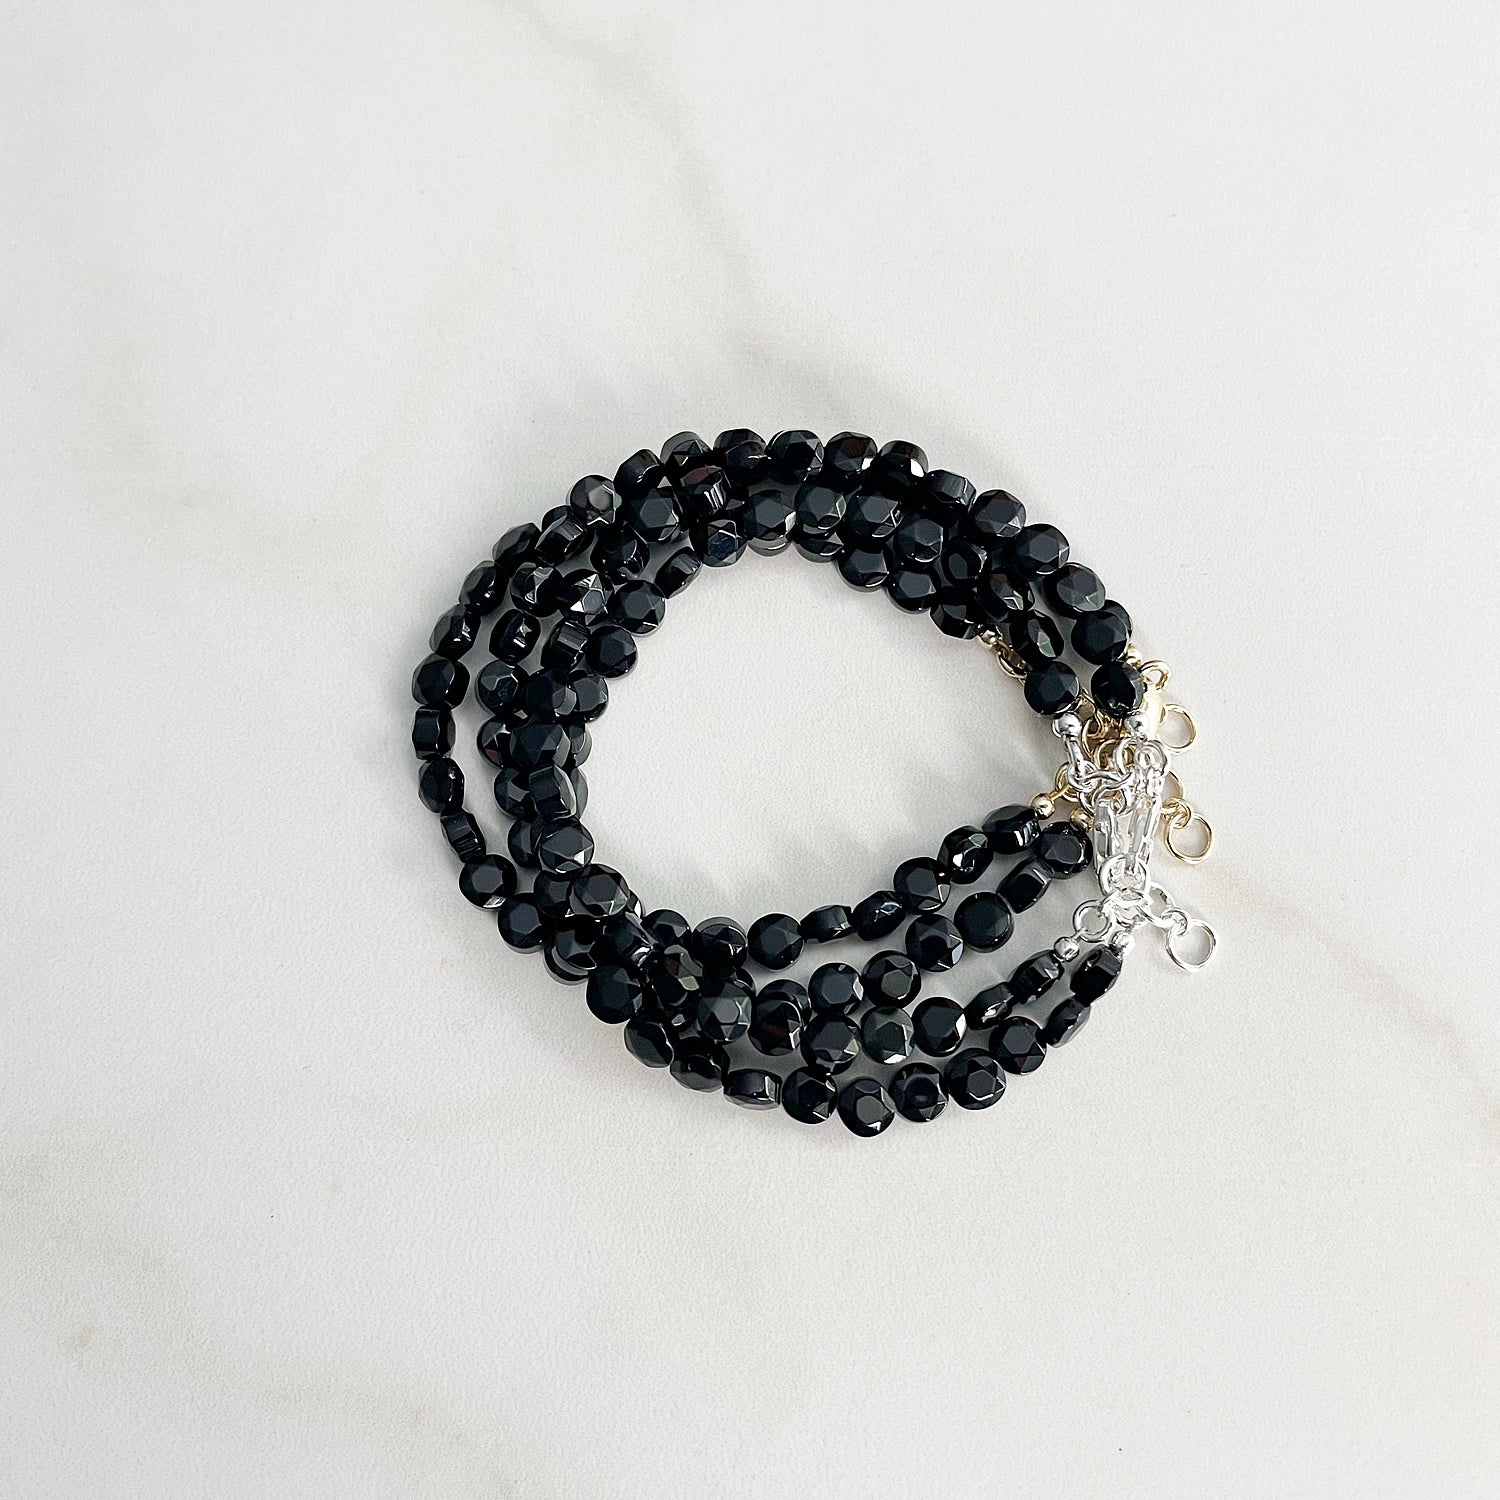 group of onyx bracelets in a stack on a white background